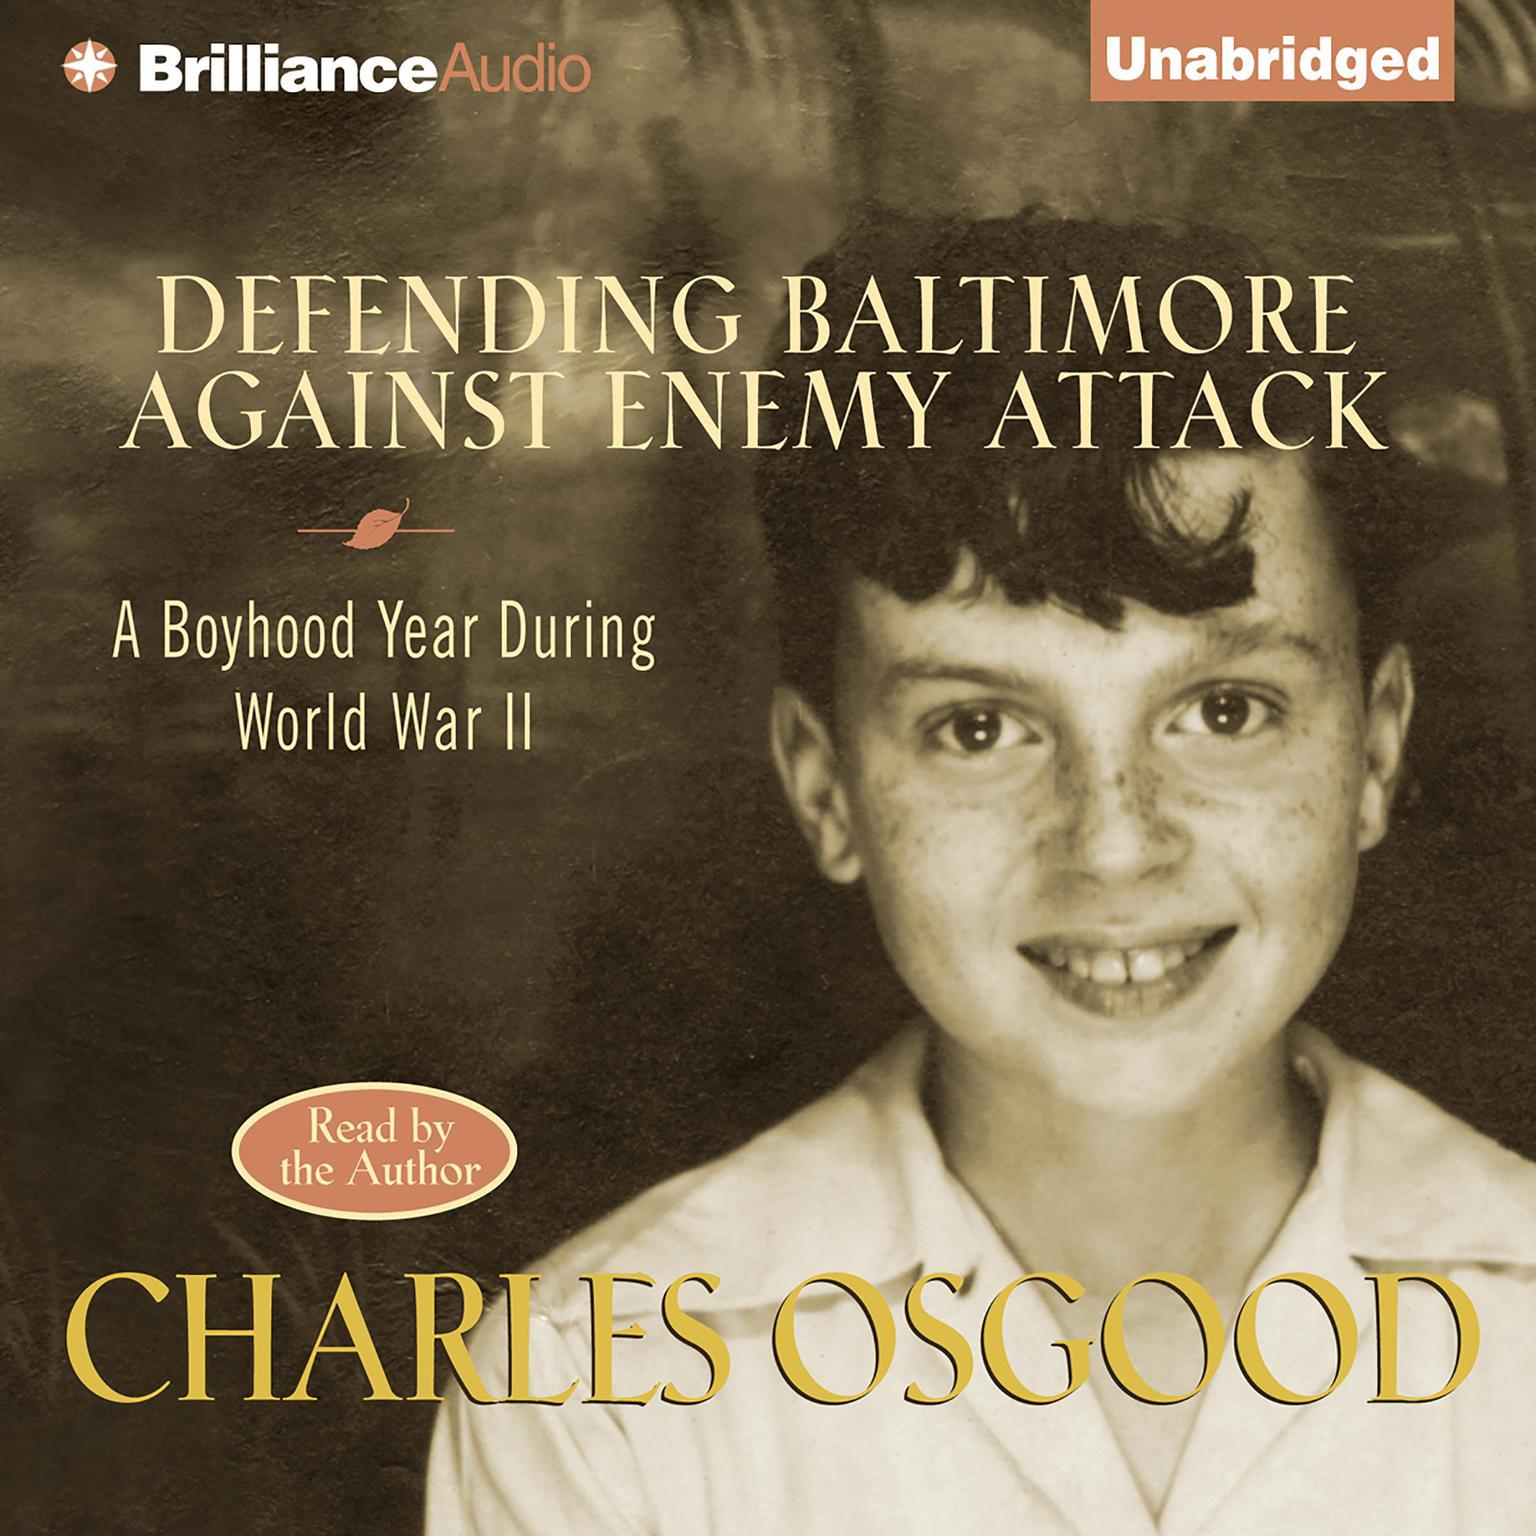 Defending Baltimore Against Enemy Attack: A Boyhood Year During WWII Audiobook, by Charles Osgood